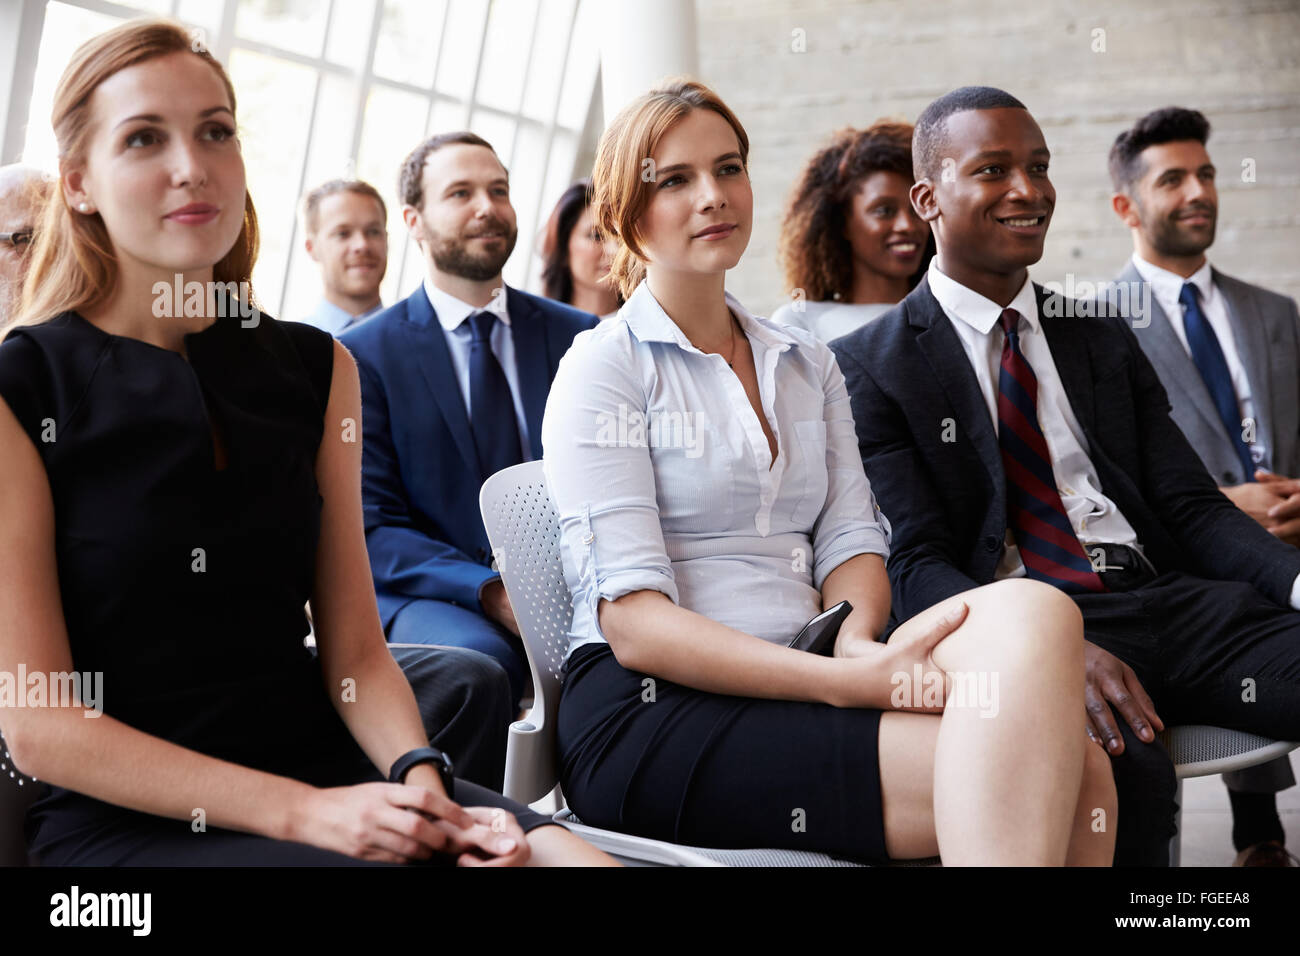 Audience Listening To Speaker At Business Conference Stock Photo